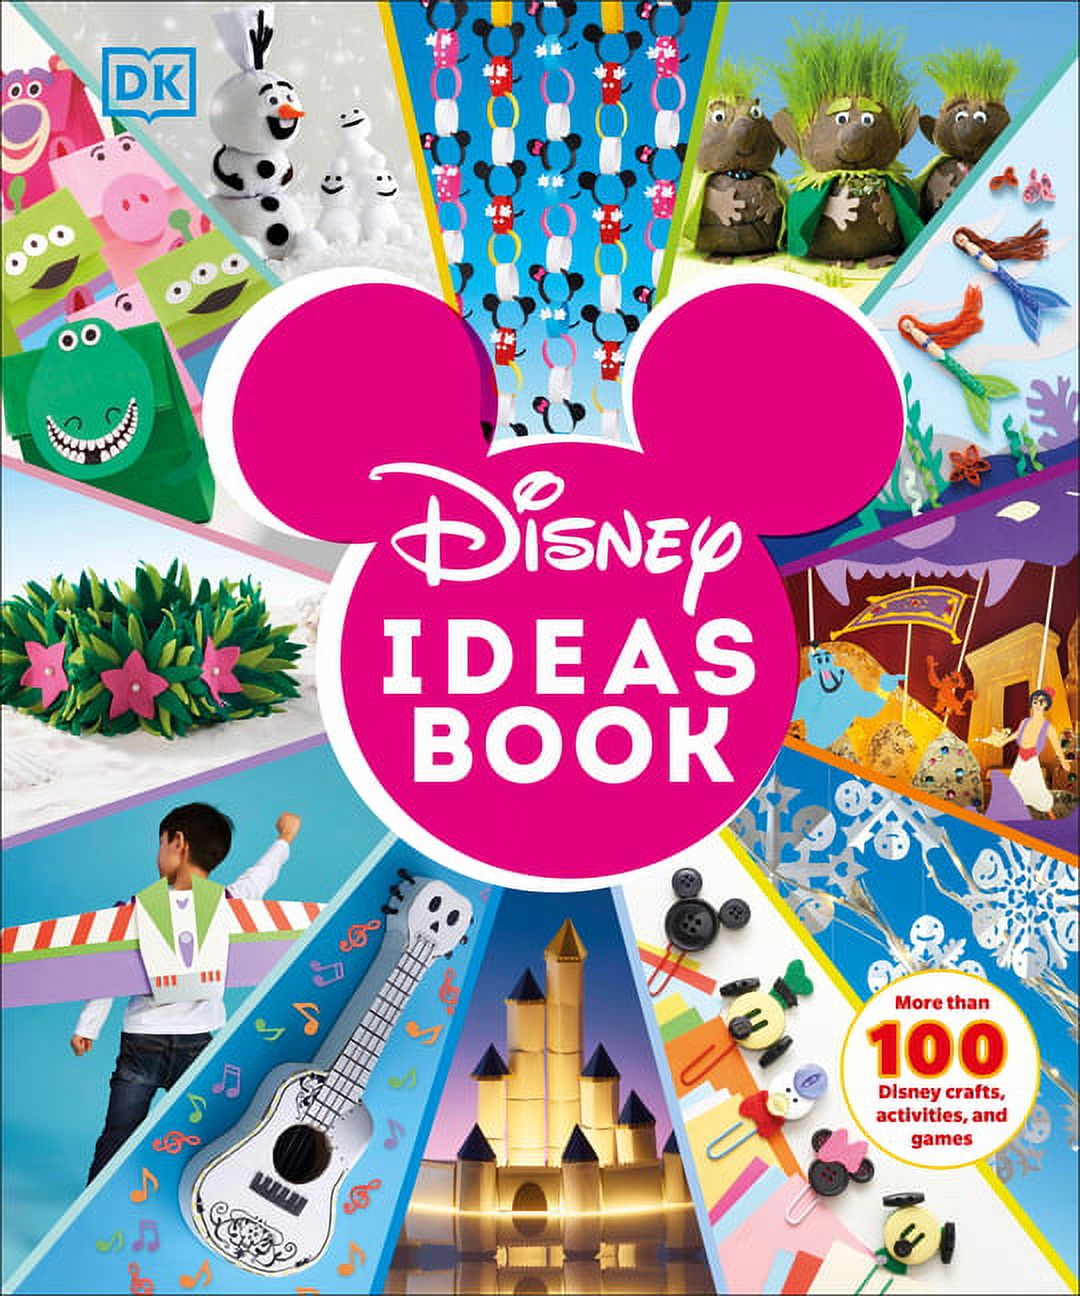 Than　Crafts,　Book:　Ideas　Disney　Games　and　Disney　More　Activities,　100　Hardcover)